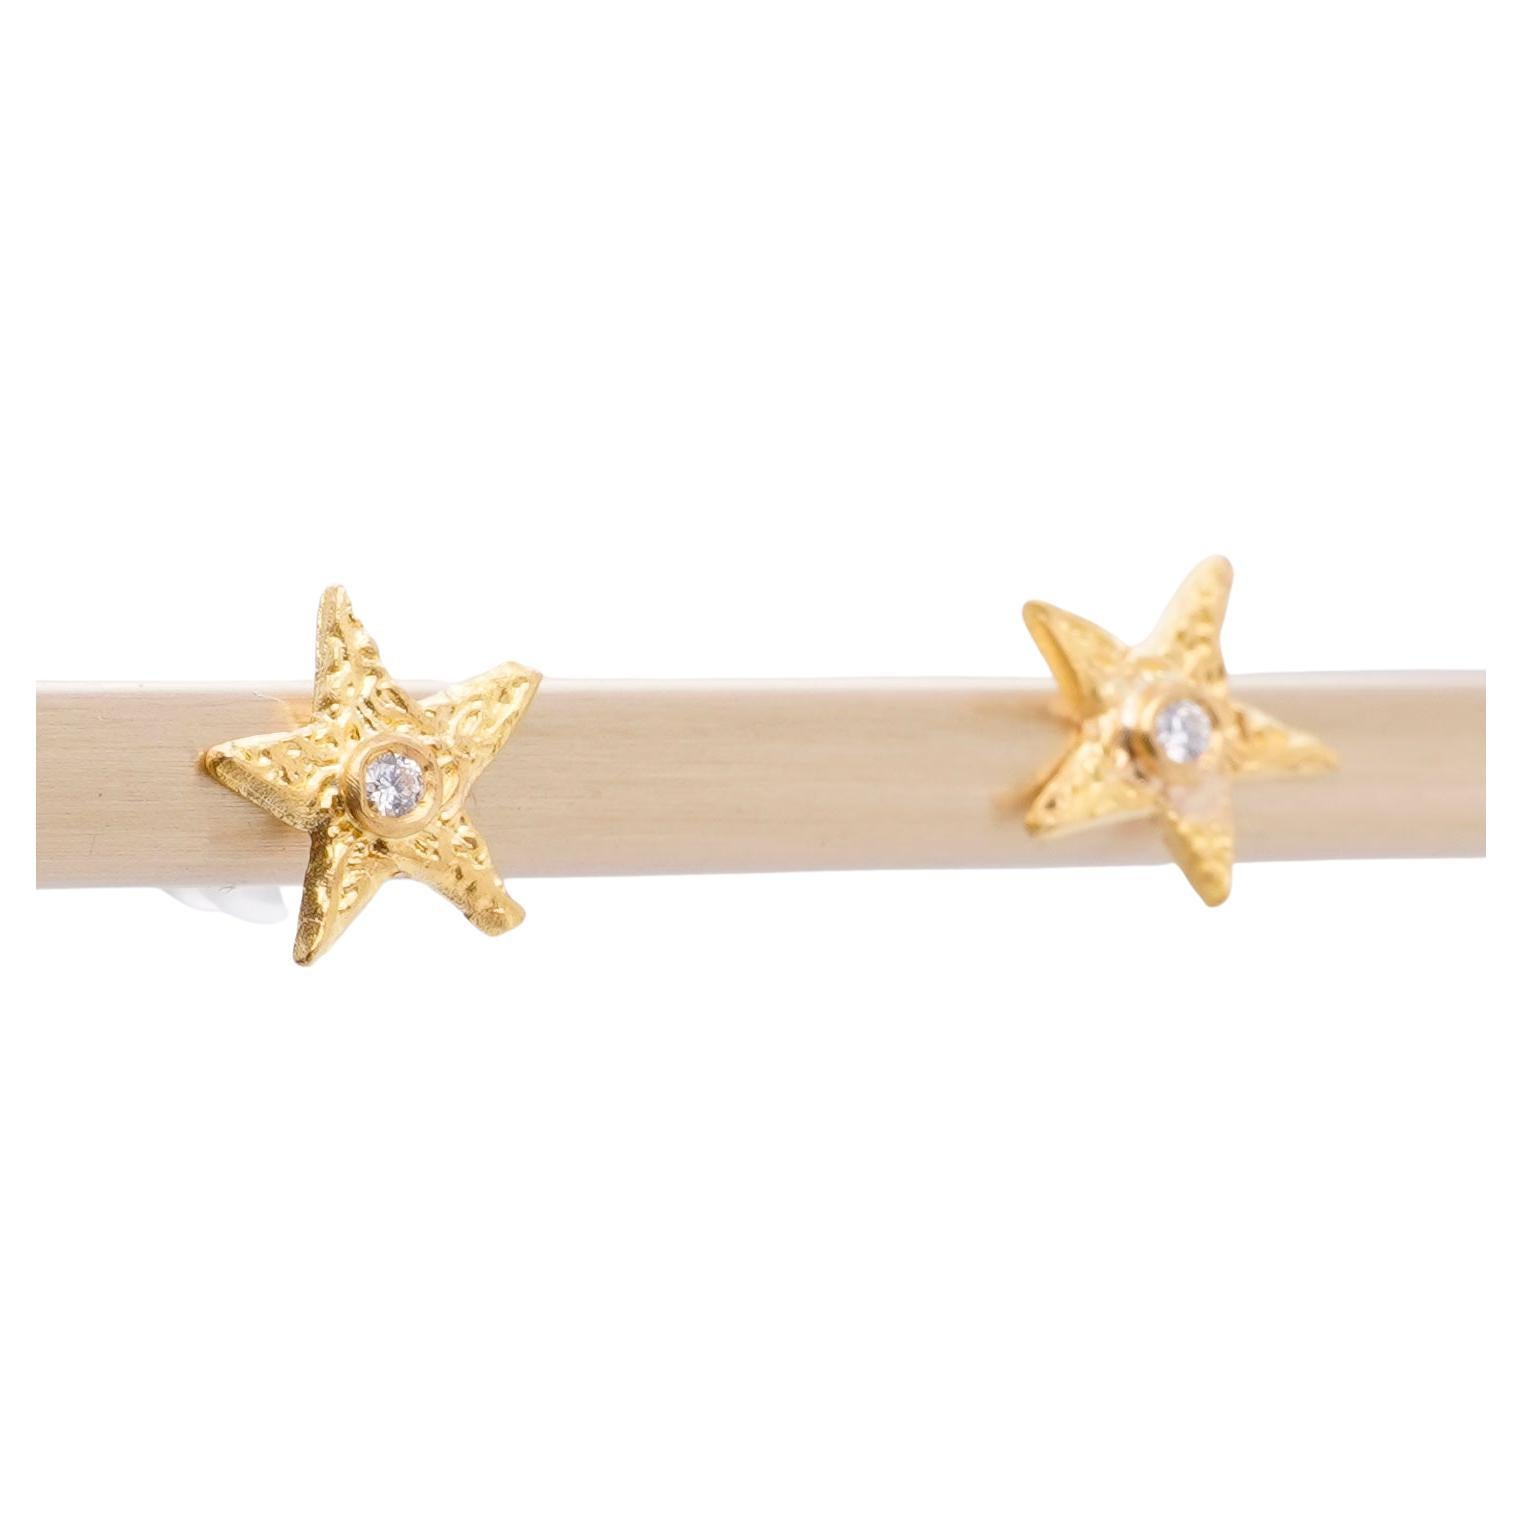 Textured, Star Stud Earrings with Diamonds, in 24kt Gold For Sale 1